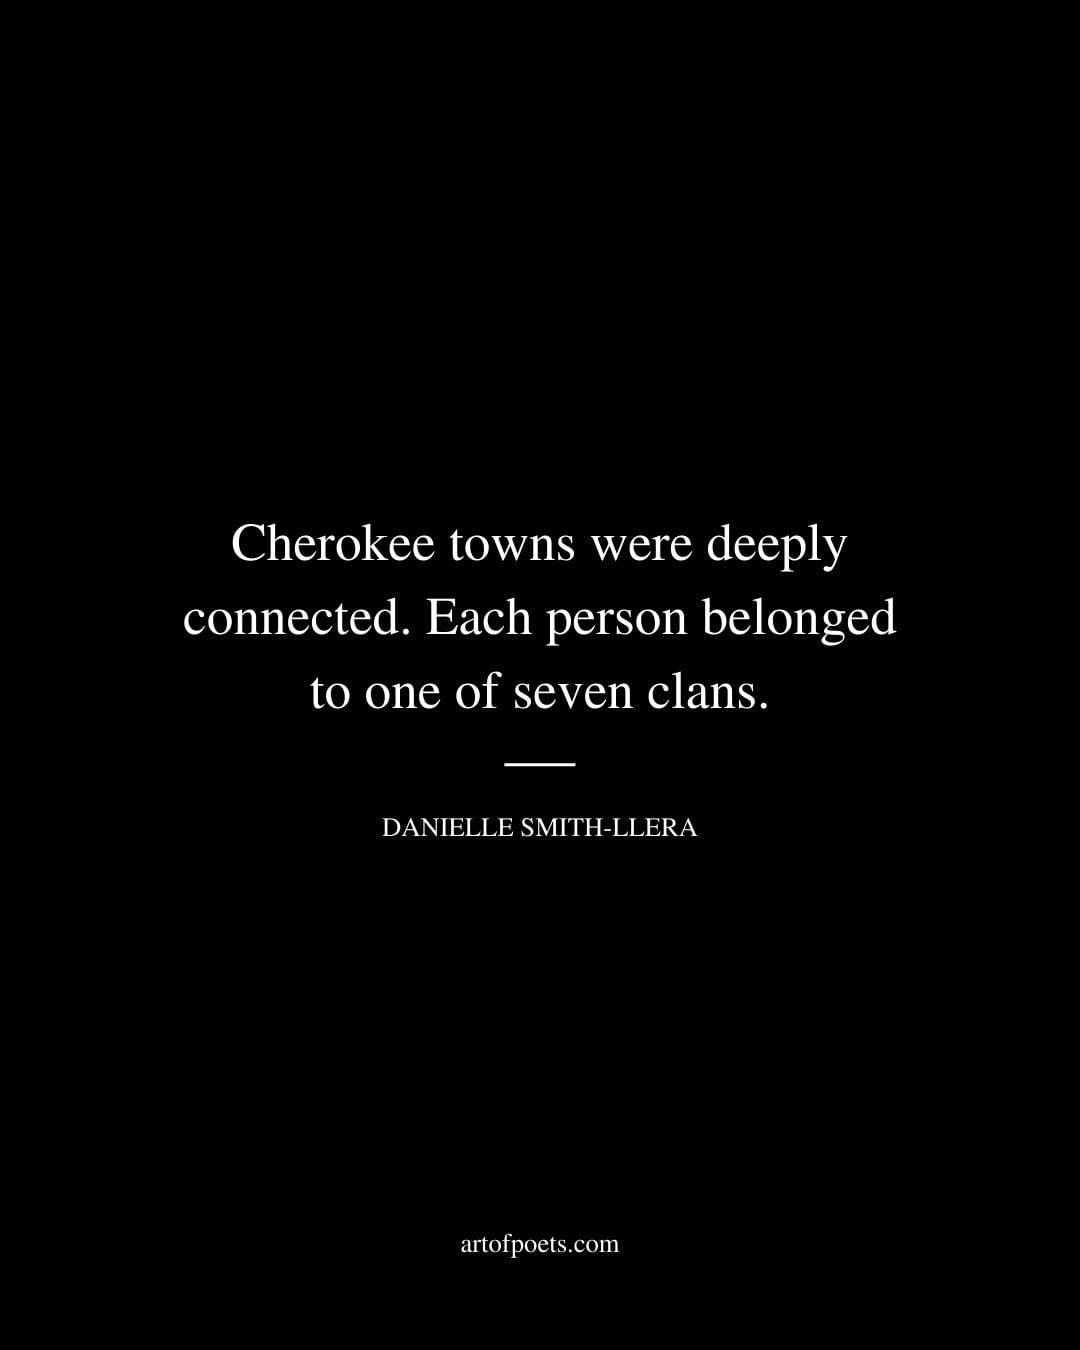 Cherokee towns were deeply connected. Each person belonged to one of seven clans. Danielle Smith Llera